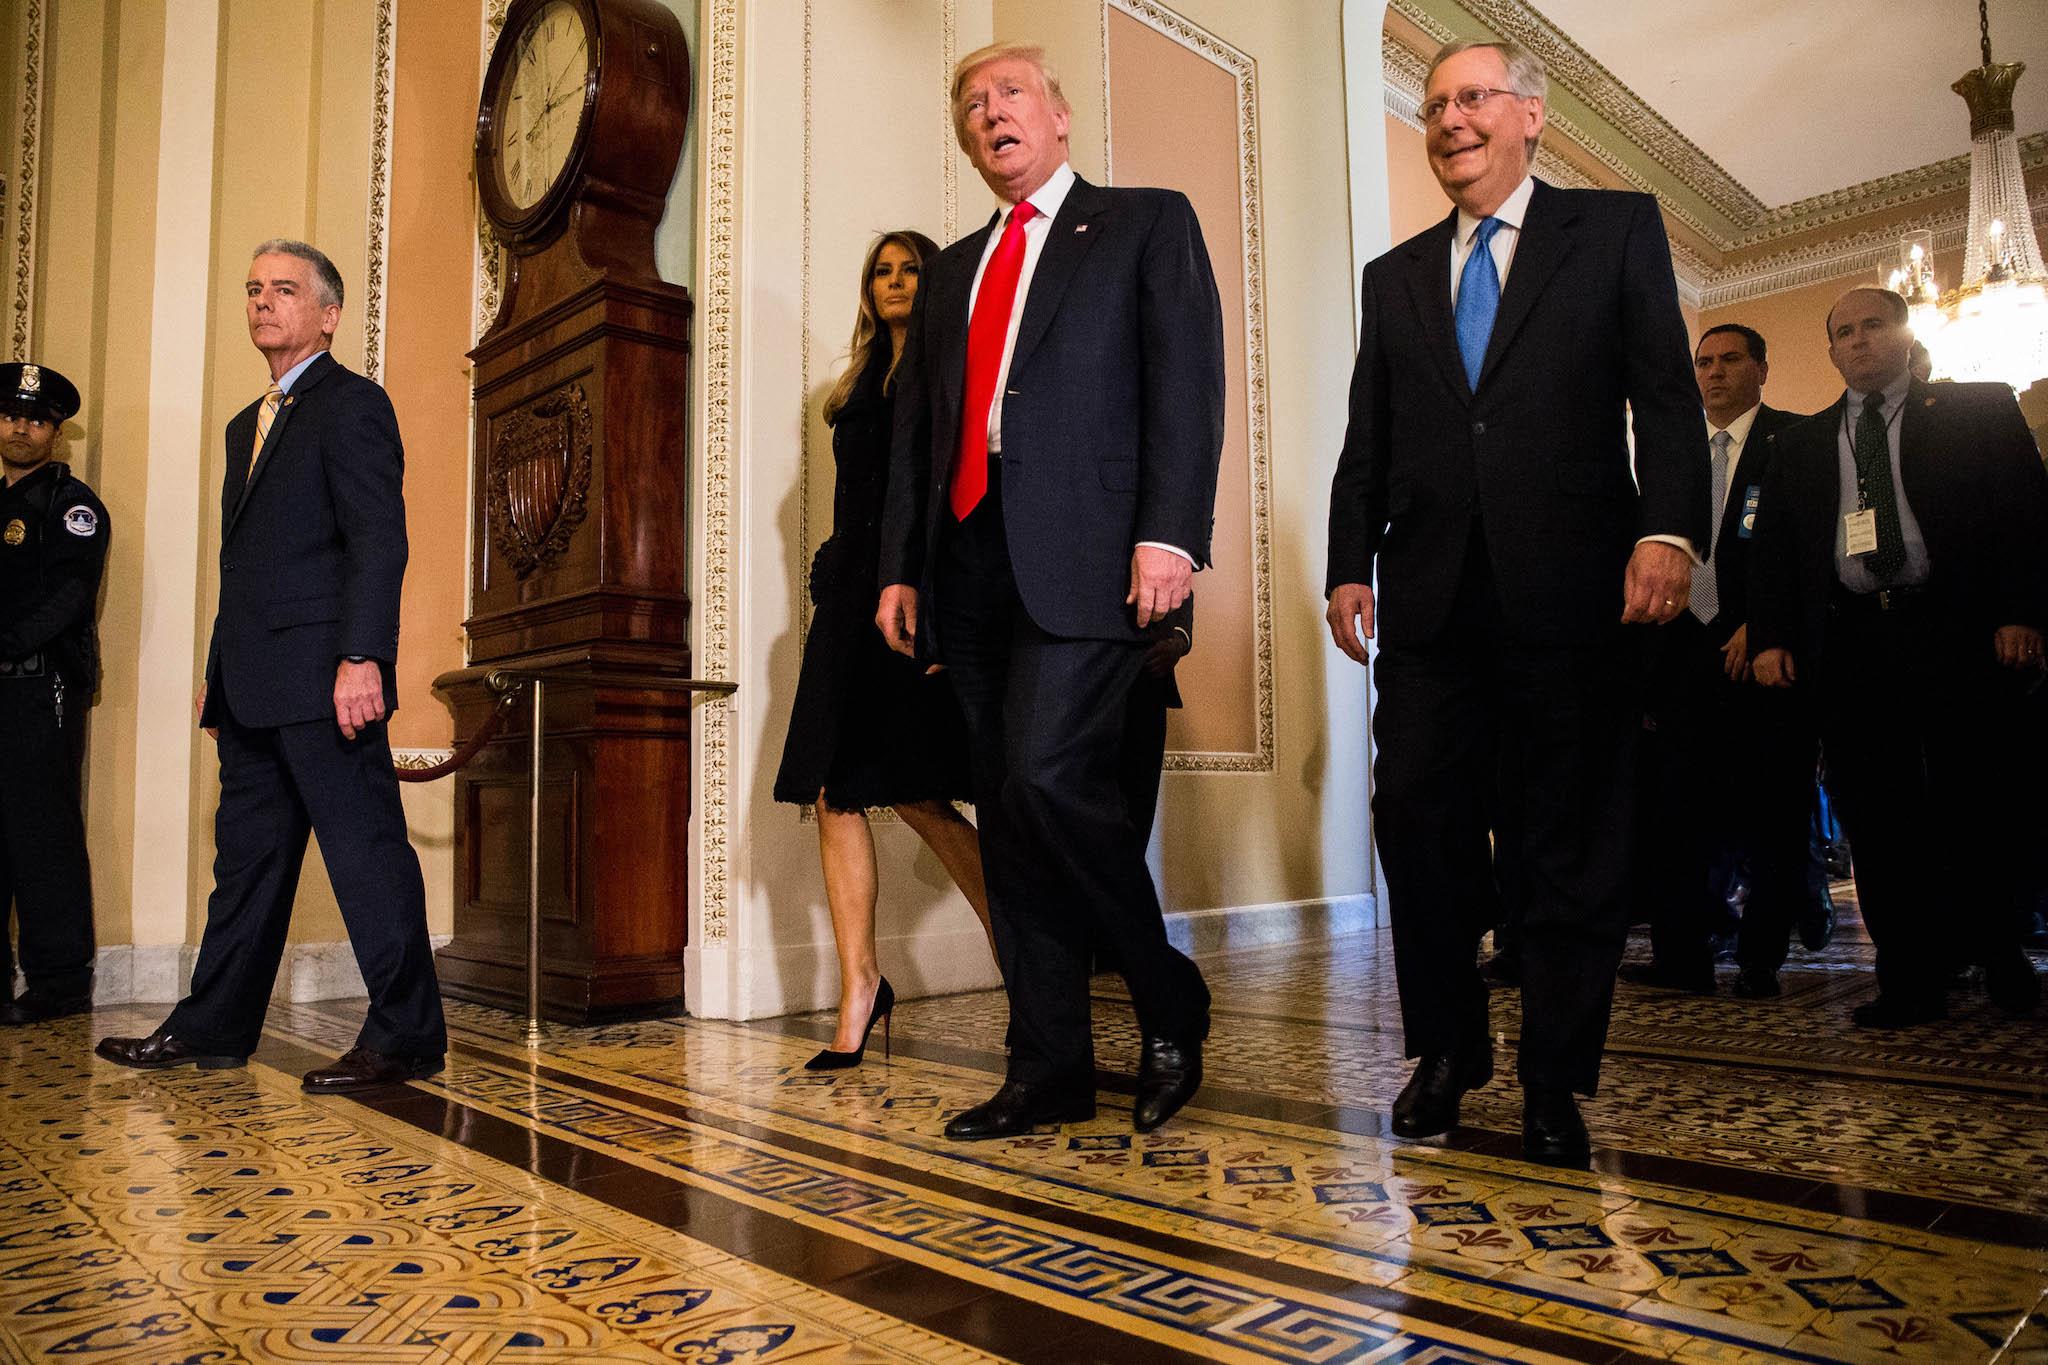 President-elect Donald Trump leaves a meeting with Senate Majority Leader Mitch McConnell (R-KY), at the U.S. Capitol November 10, 2016 in Washington, DC